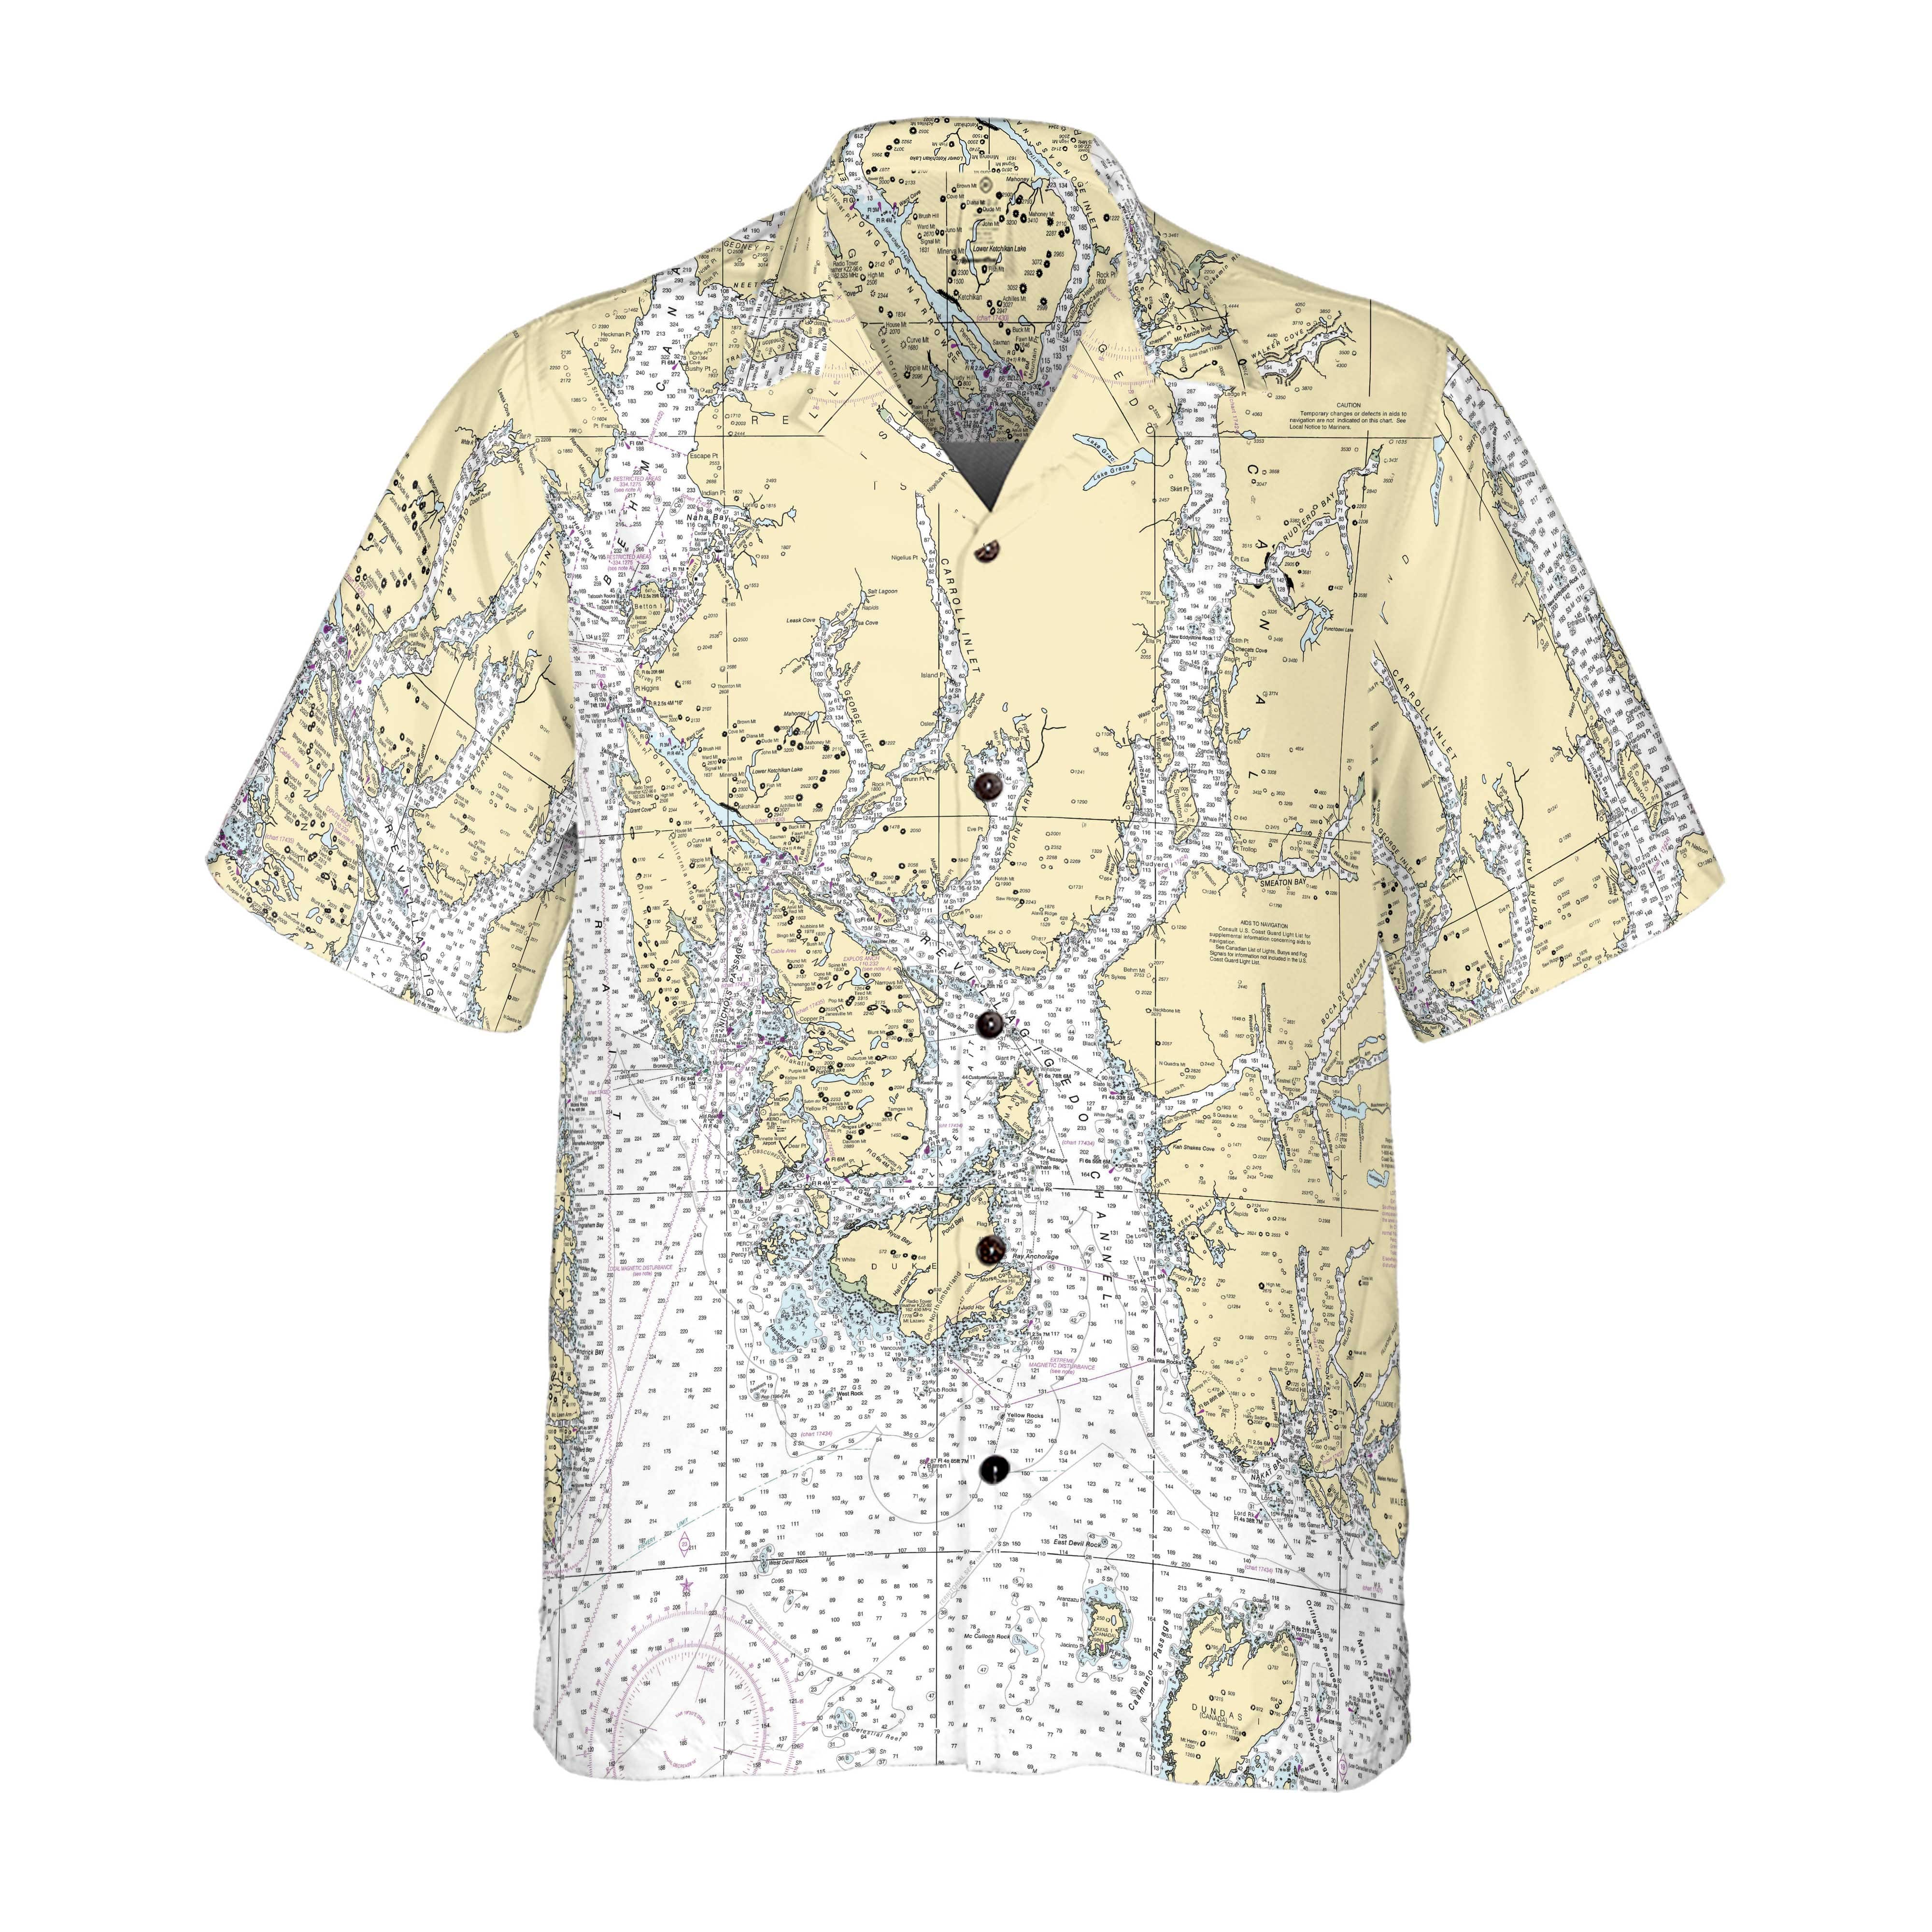 The Ketchikan Coconut Button Camp Shirt